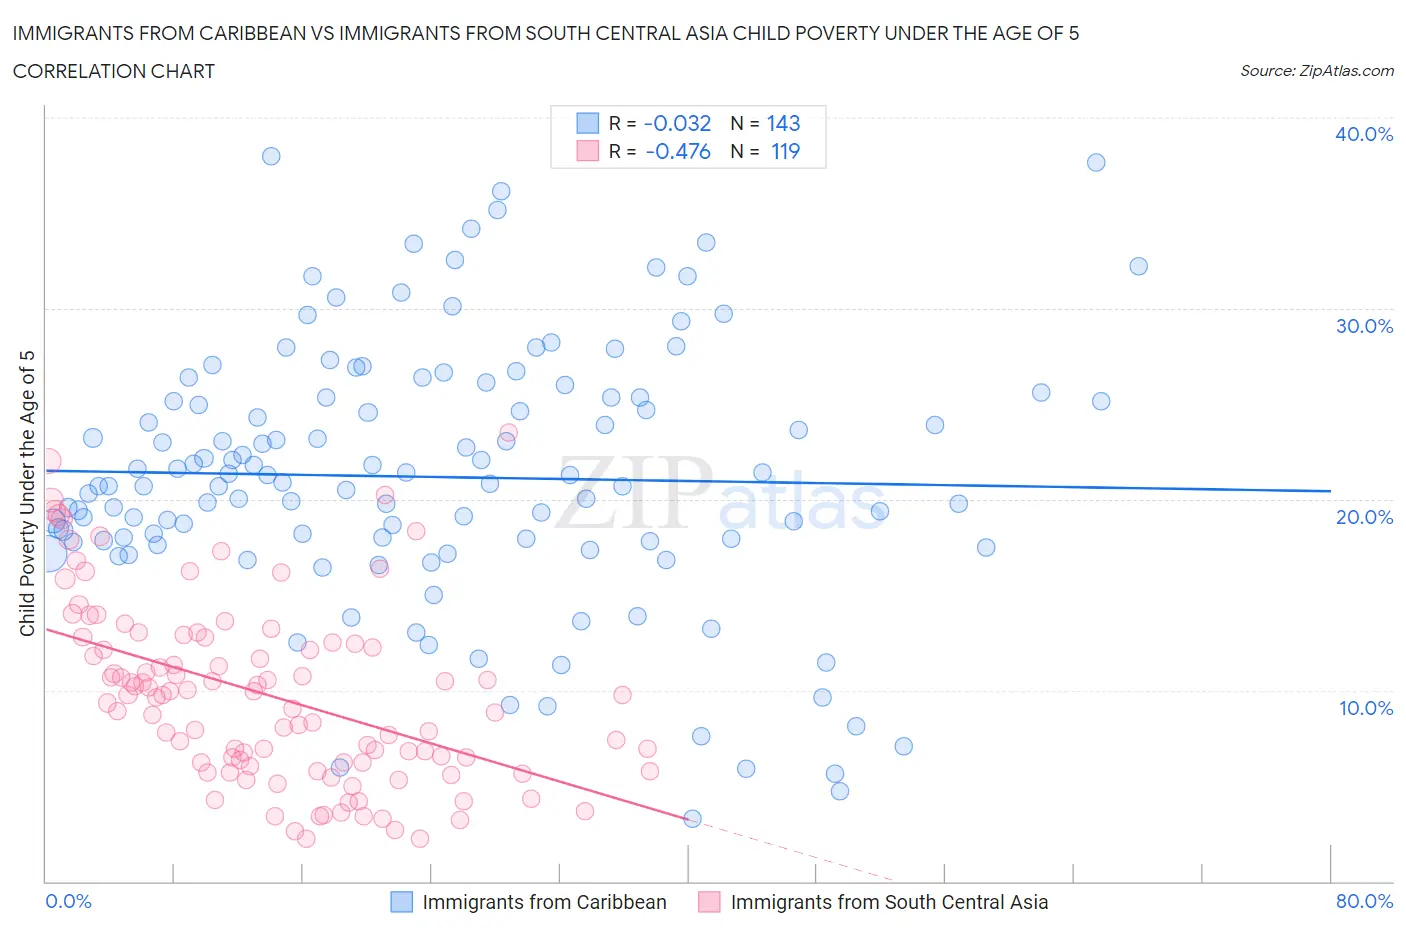 Immigrants from Caribbean vs Immigrants from South Central Asia Child Poverty Under the Age of 5